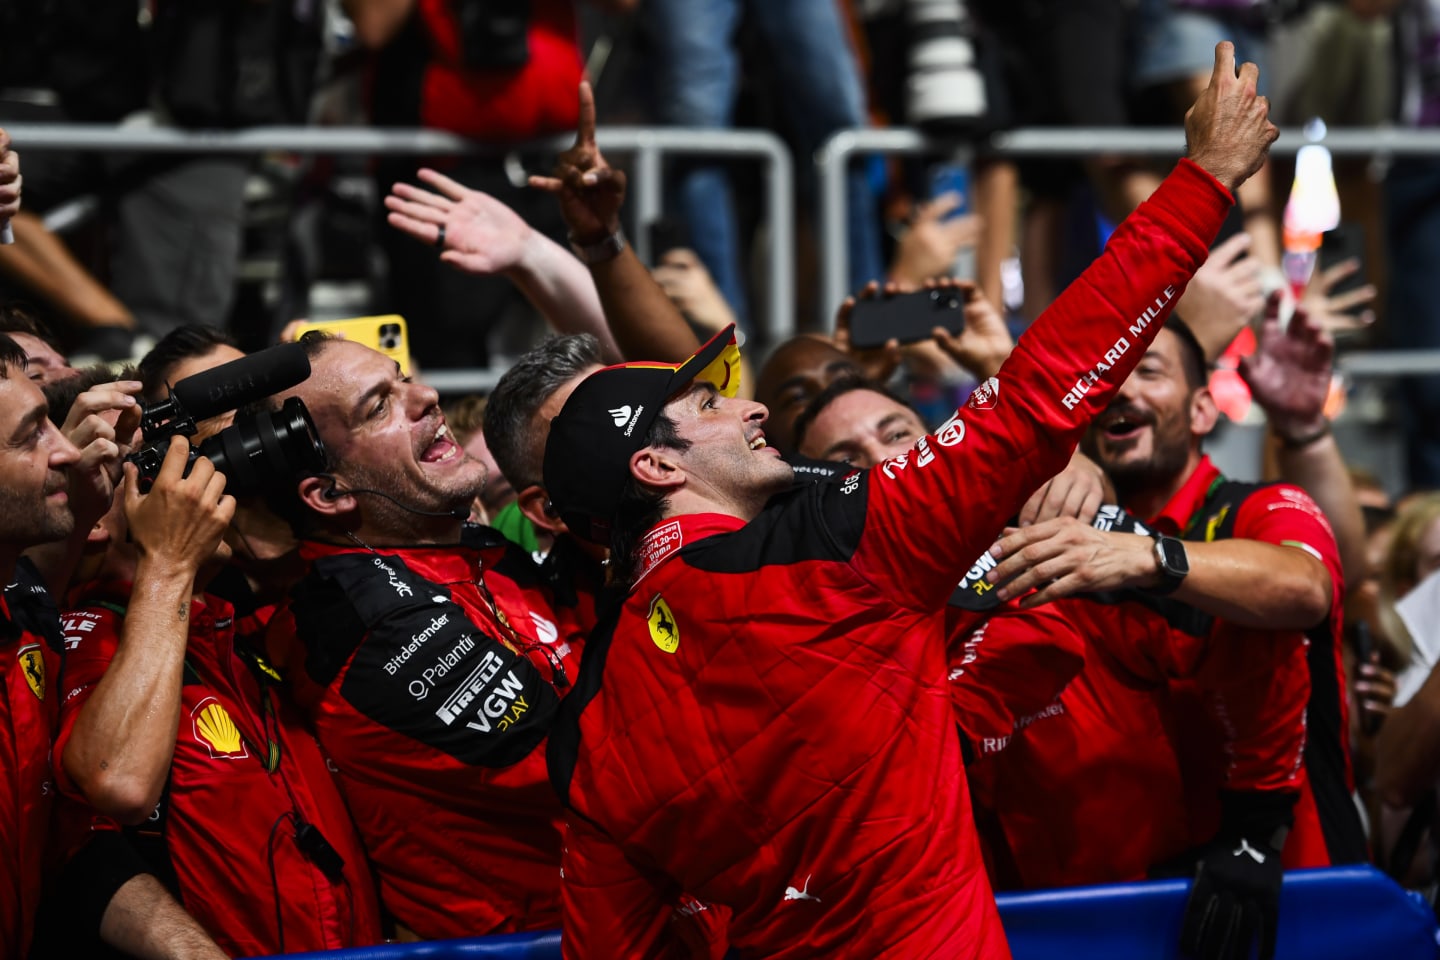 SINGAPORE, SINGAPORE - SEPTEMBER 17: Race winner Carlos Sainz of Spain and Ferrari celebrates with his team in parc ferme during the F1 Grand Prix of Singapore at Marina Bay Street Circuit on September 17, 2023 in Singapore, Singapore. (Photo by Rudy Carezzevoli/Getty Images)